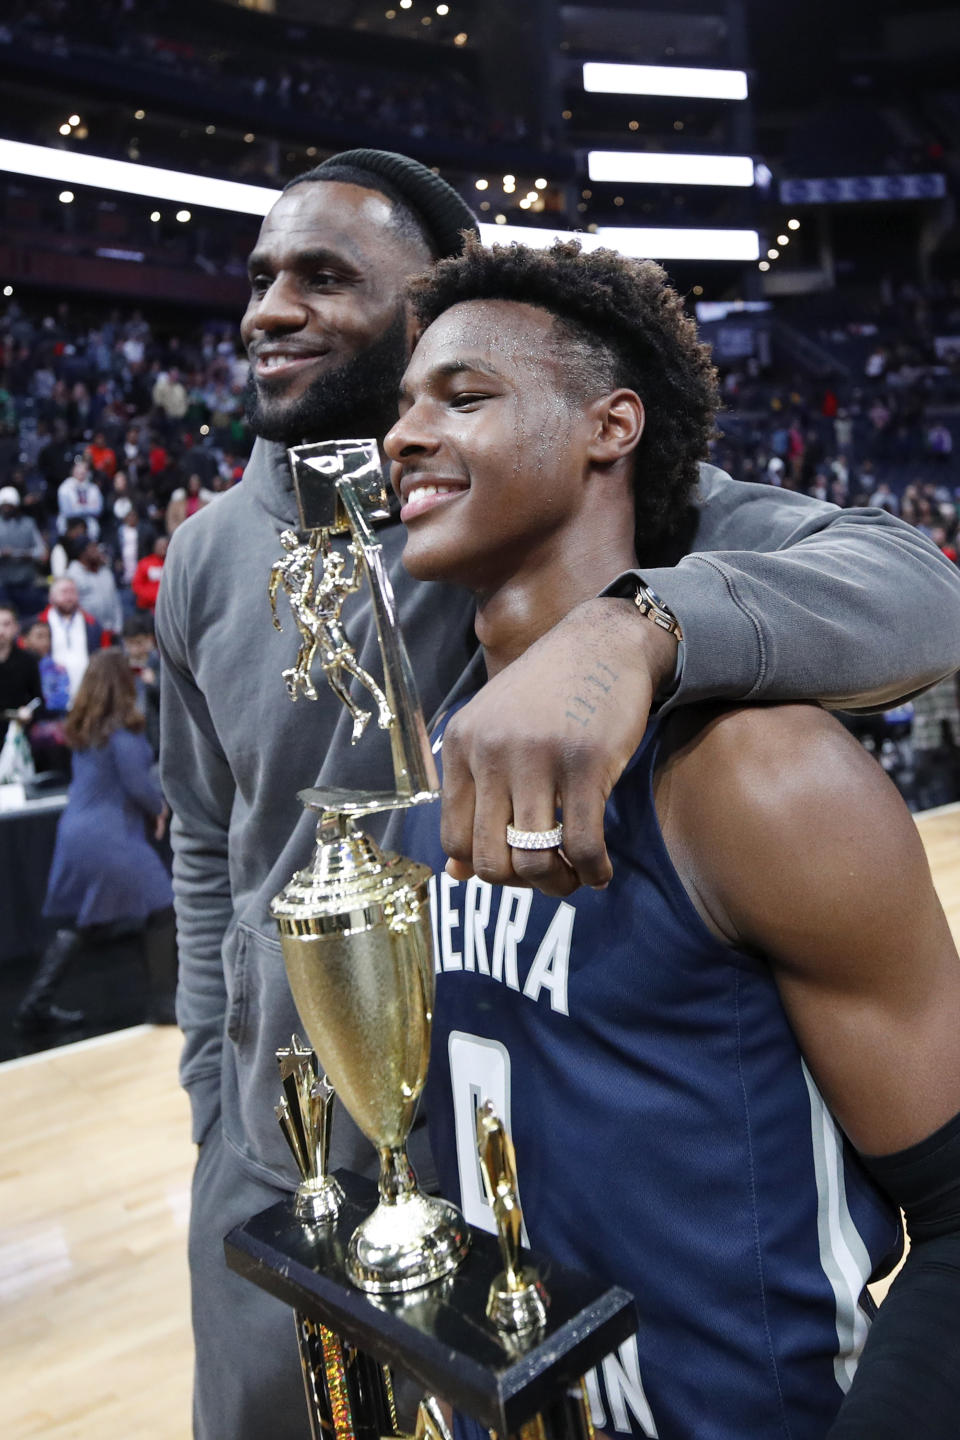 LeBron ‘Bronny’ James Jr. #0 of Sierra Canyon High School with his father <span class="caas-xray-inline-tooltip"><span class="caas-xray-inline caas-xray-entity caas-xray-pill rapid-nonanchor-lt" data-entity-id="LeBron_James" data-ylk="cid:LeBron_James;pos:2;elmt:wiki;sec:pill-inline-entity;elm:pill-inline-text;itc:1;cat:Athlete;" tabindex="0" aria-haspopup="dialog"><a href="https://search.yahoo.com/search?p=LeBron%20James" data-i13n="cid:LeBron_James;pos:2;elmt:wiki;sec:pill-inline-entity;elm:pill-inline-text;itc:1;cat:Athlete;" tabindex="-1" data-ylk="slk:LeBron James;cid:LeBron_James;pos:2;elmt:wiki;sec:pill-inline-entity;elm:pill-inline-text;itc:1;cat:Athlete;" class="link ">LeBron James</a></span></span> of the Los Angeles Lakers following the Ohio Scholastic Play-By-Play Classic against St. Vincent-St. Mary High School at Nationwide Arena on December 14, 2019 in Columbus, Ohio.